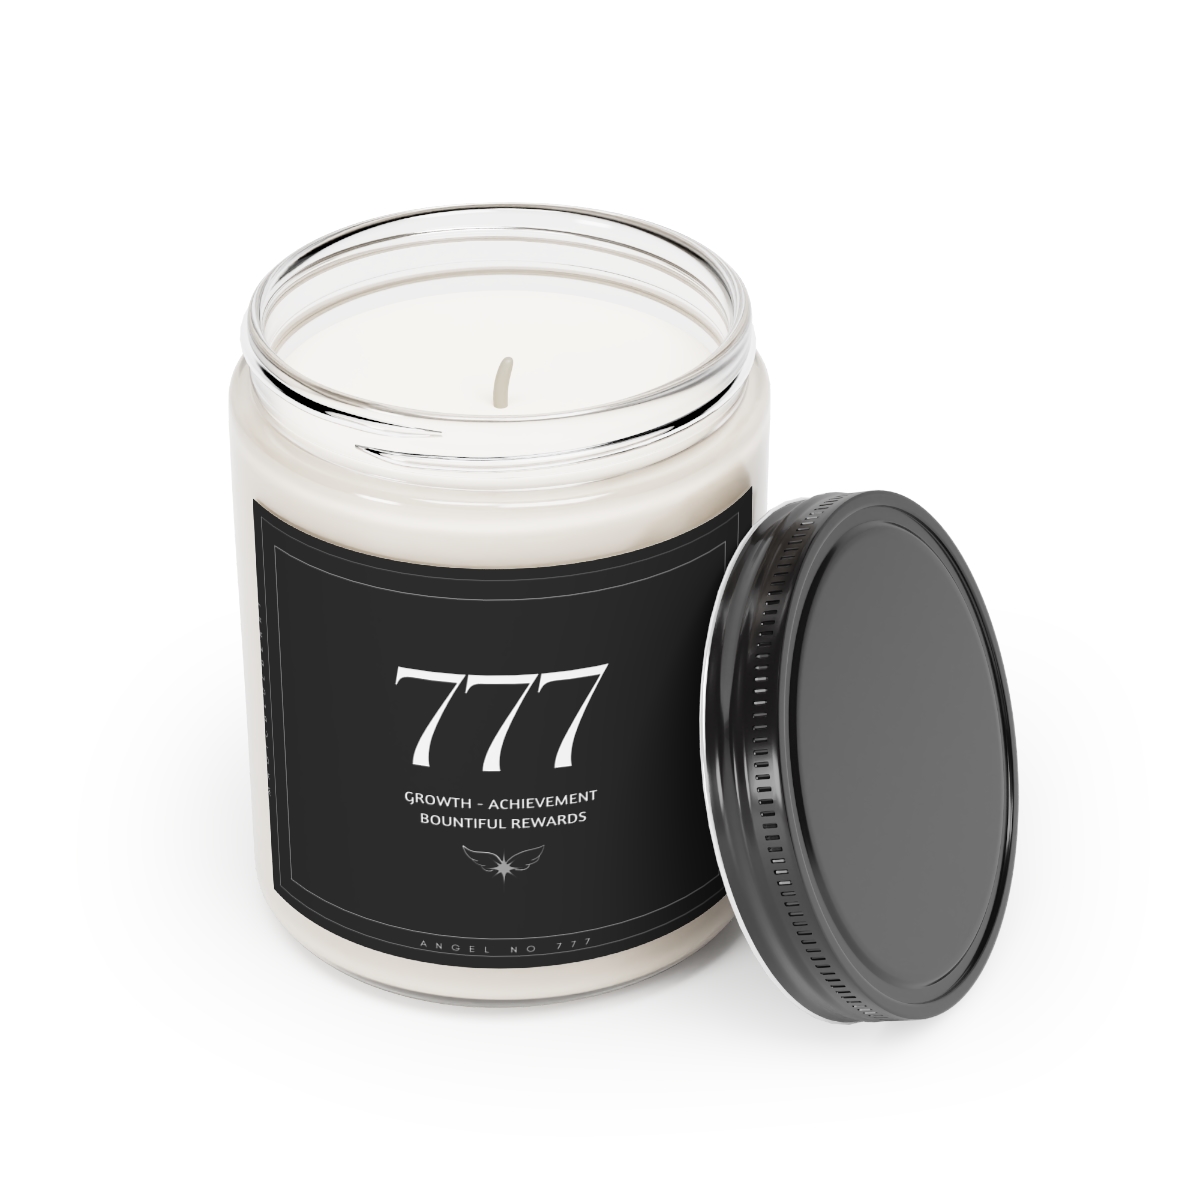 Angel Spell 777 - Scented Vegan Soy Wax Candles, Clear Jar Candle, Spell Candles, Sassy Candle, Vegan Candle, Cotton Wick Candle product thumbnail image